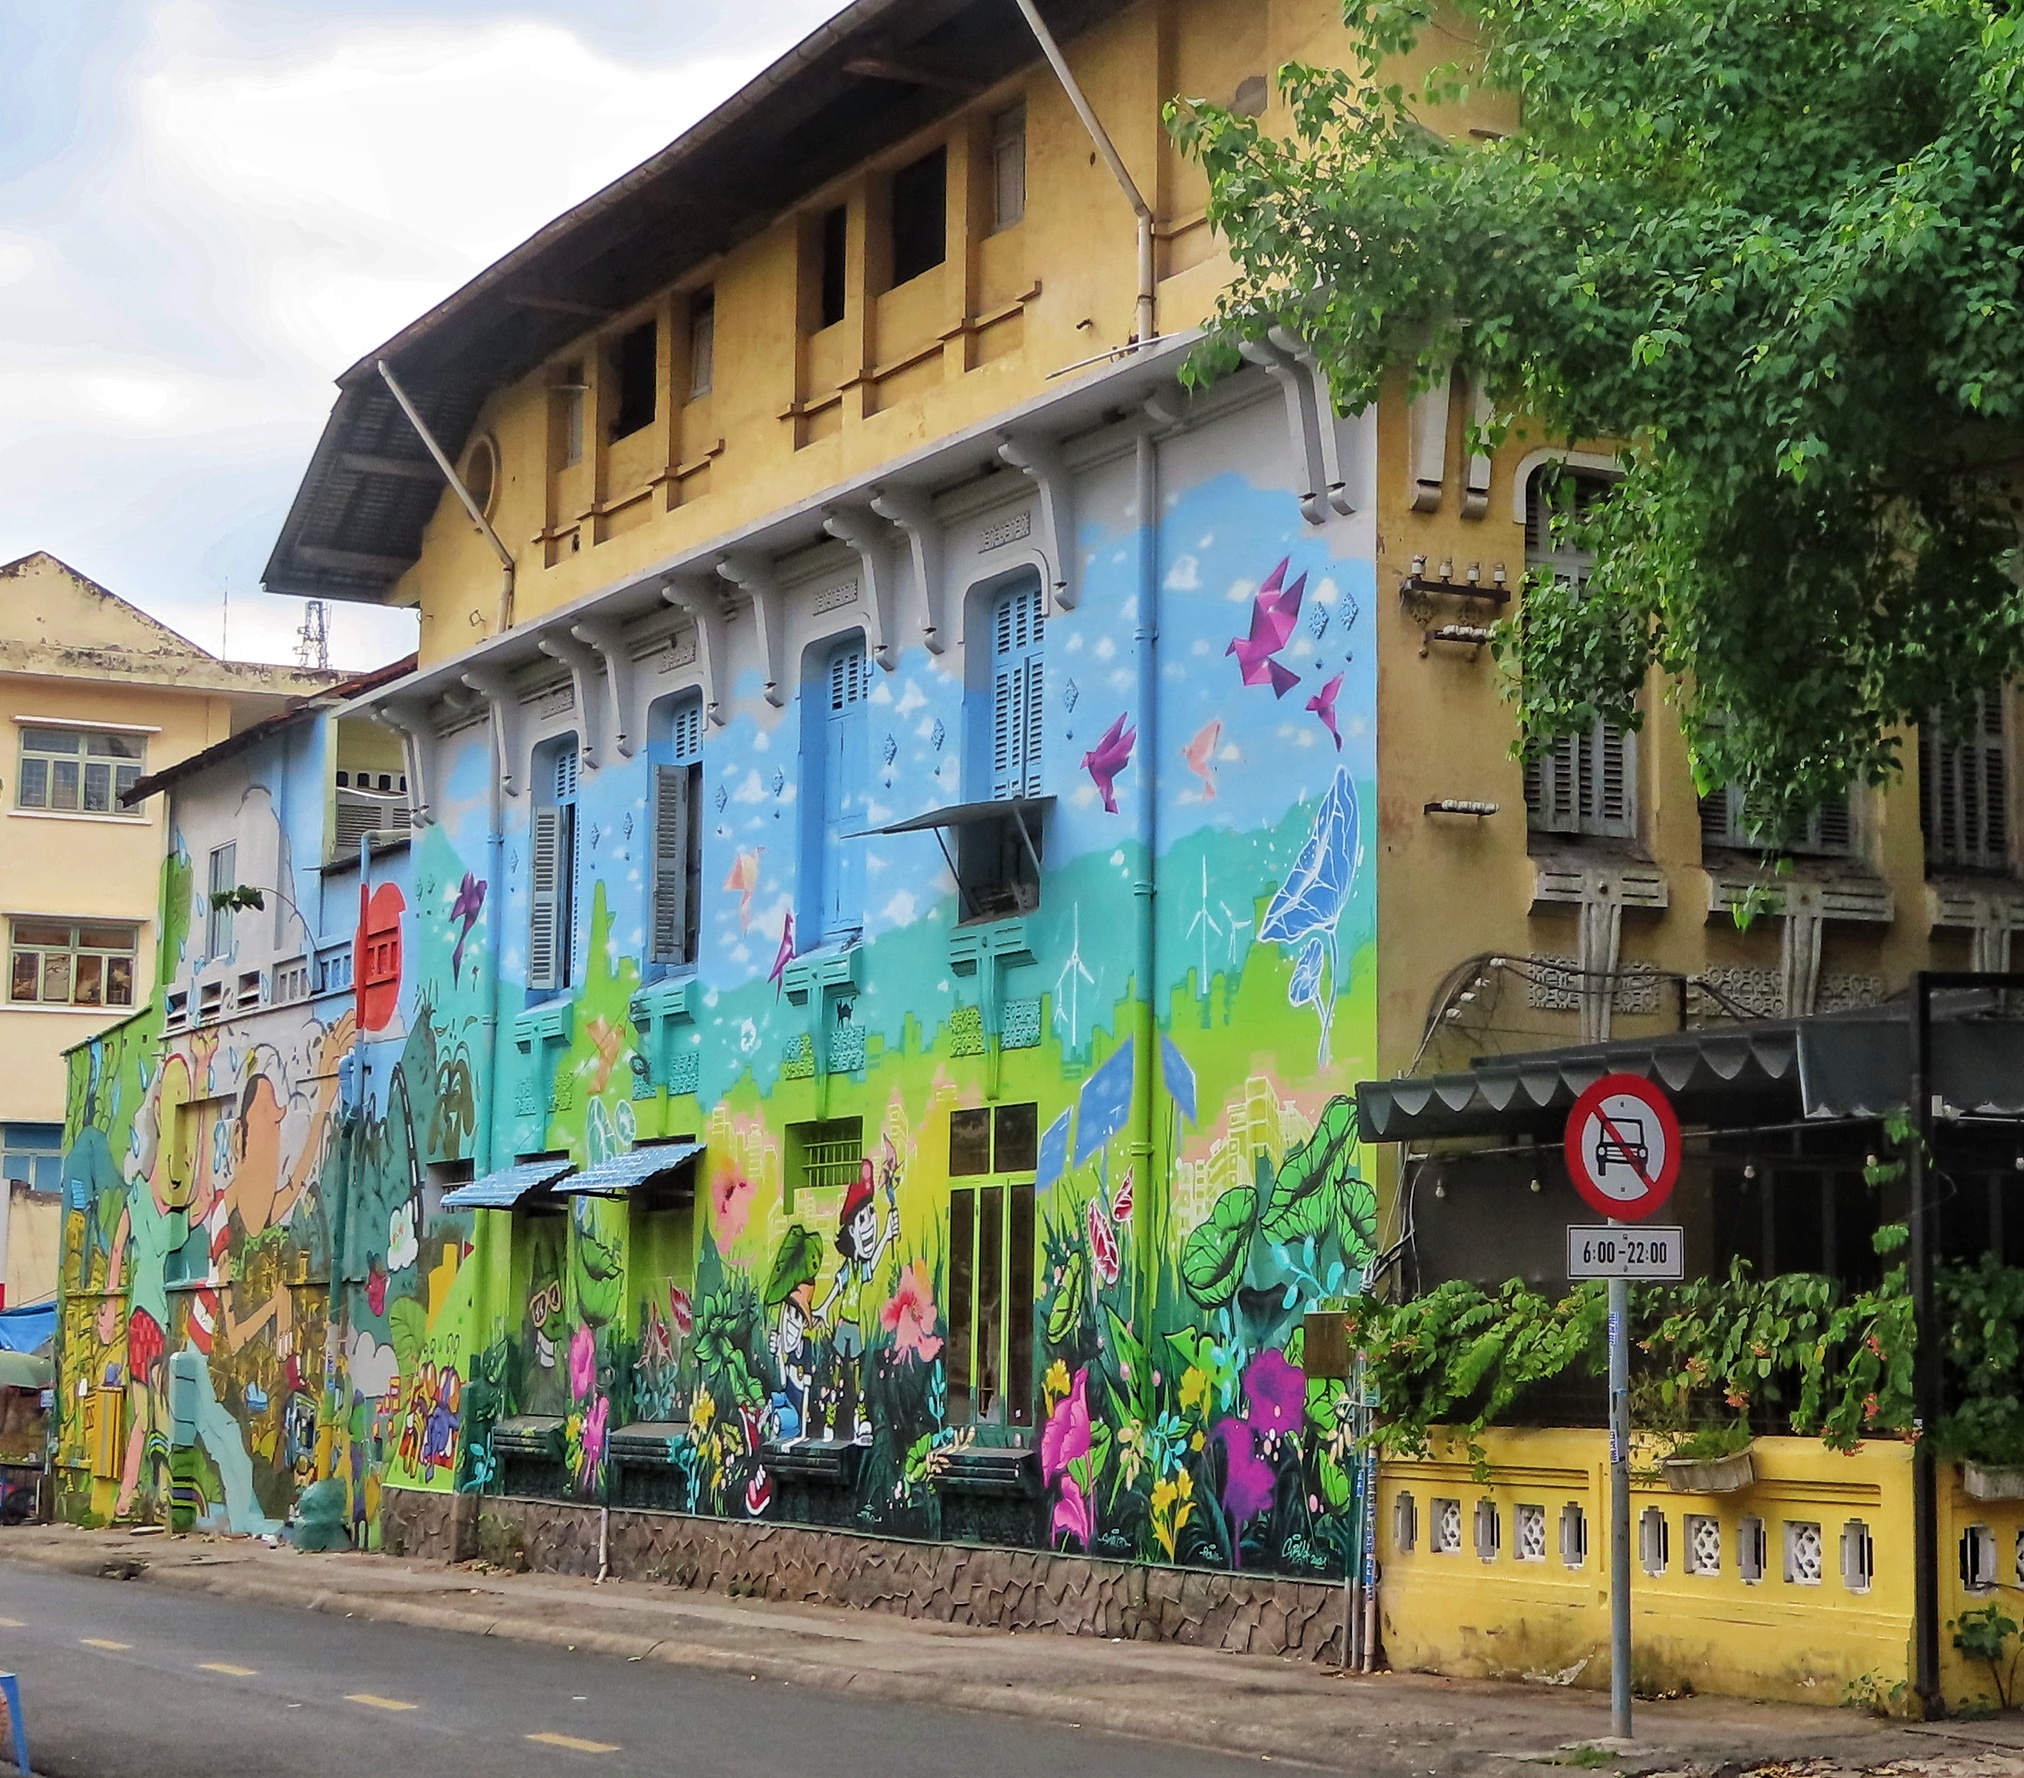 A photo by Joss Huot shows a mural he called 'gorgeous 'on a building in District 1, Ho Chi Minh City.